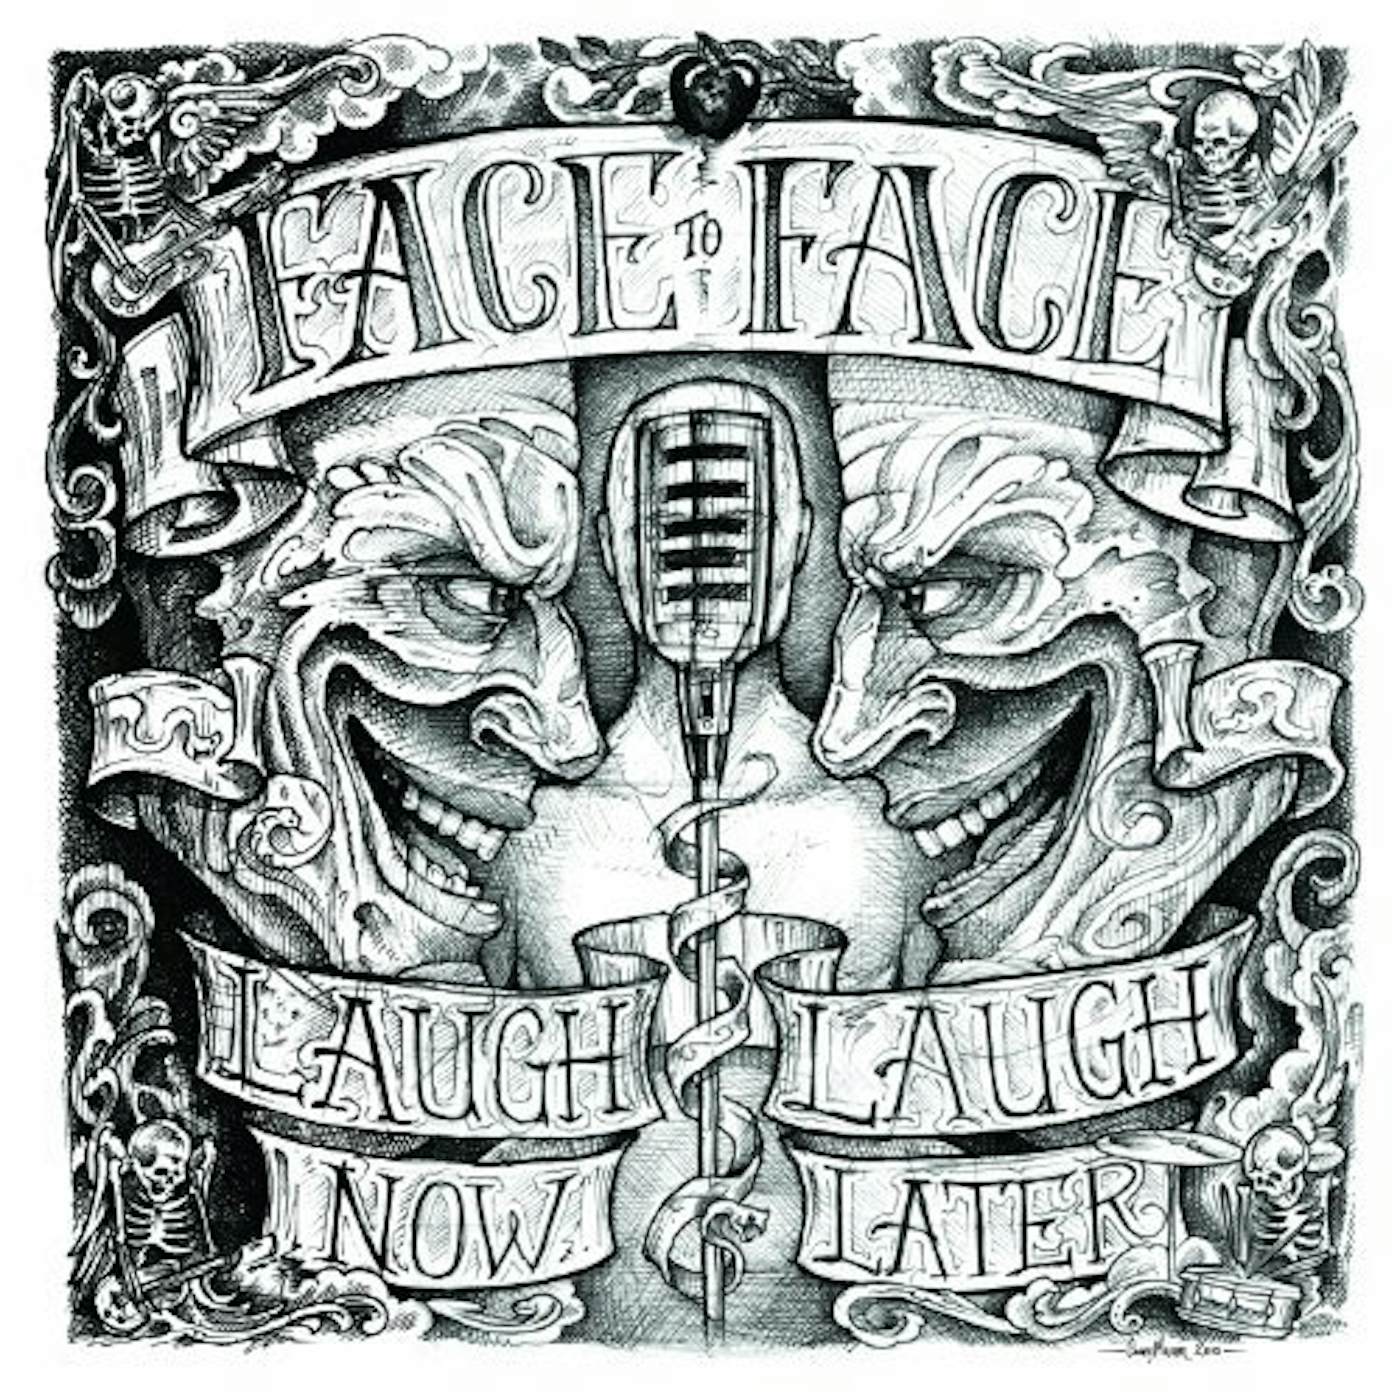 Face To Face LAUGH NOW LAUGH LATER Vinyl Record - 180 Gram Pressing